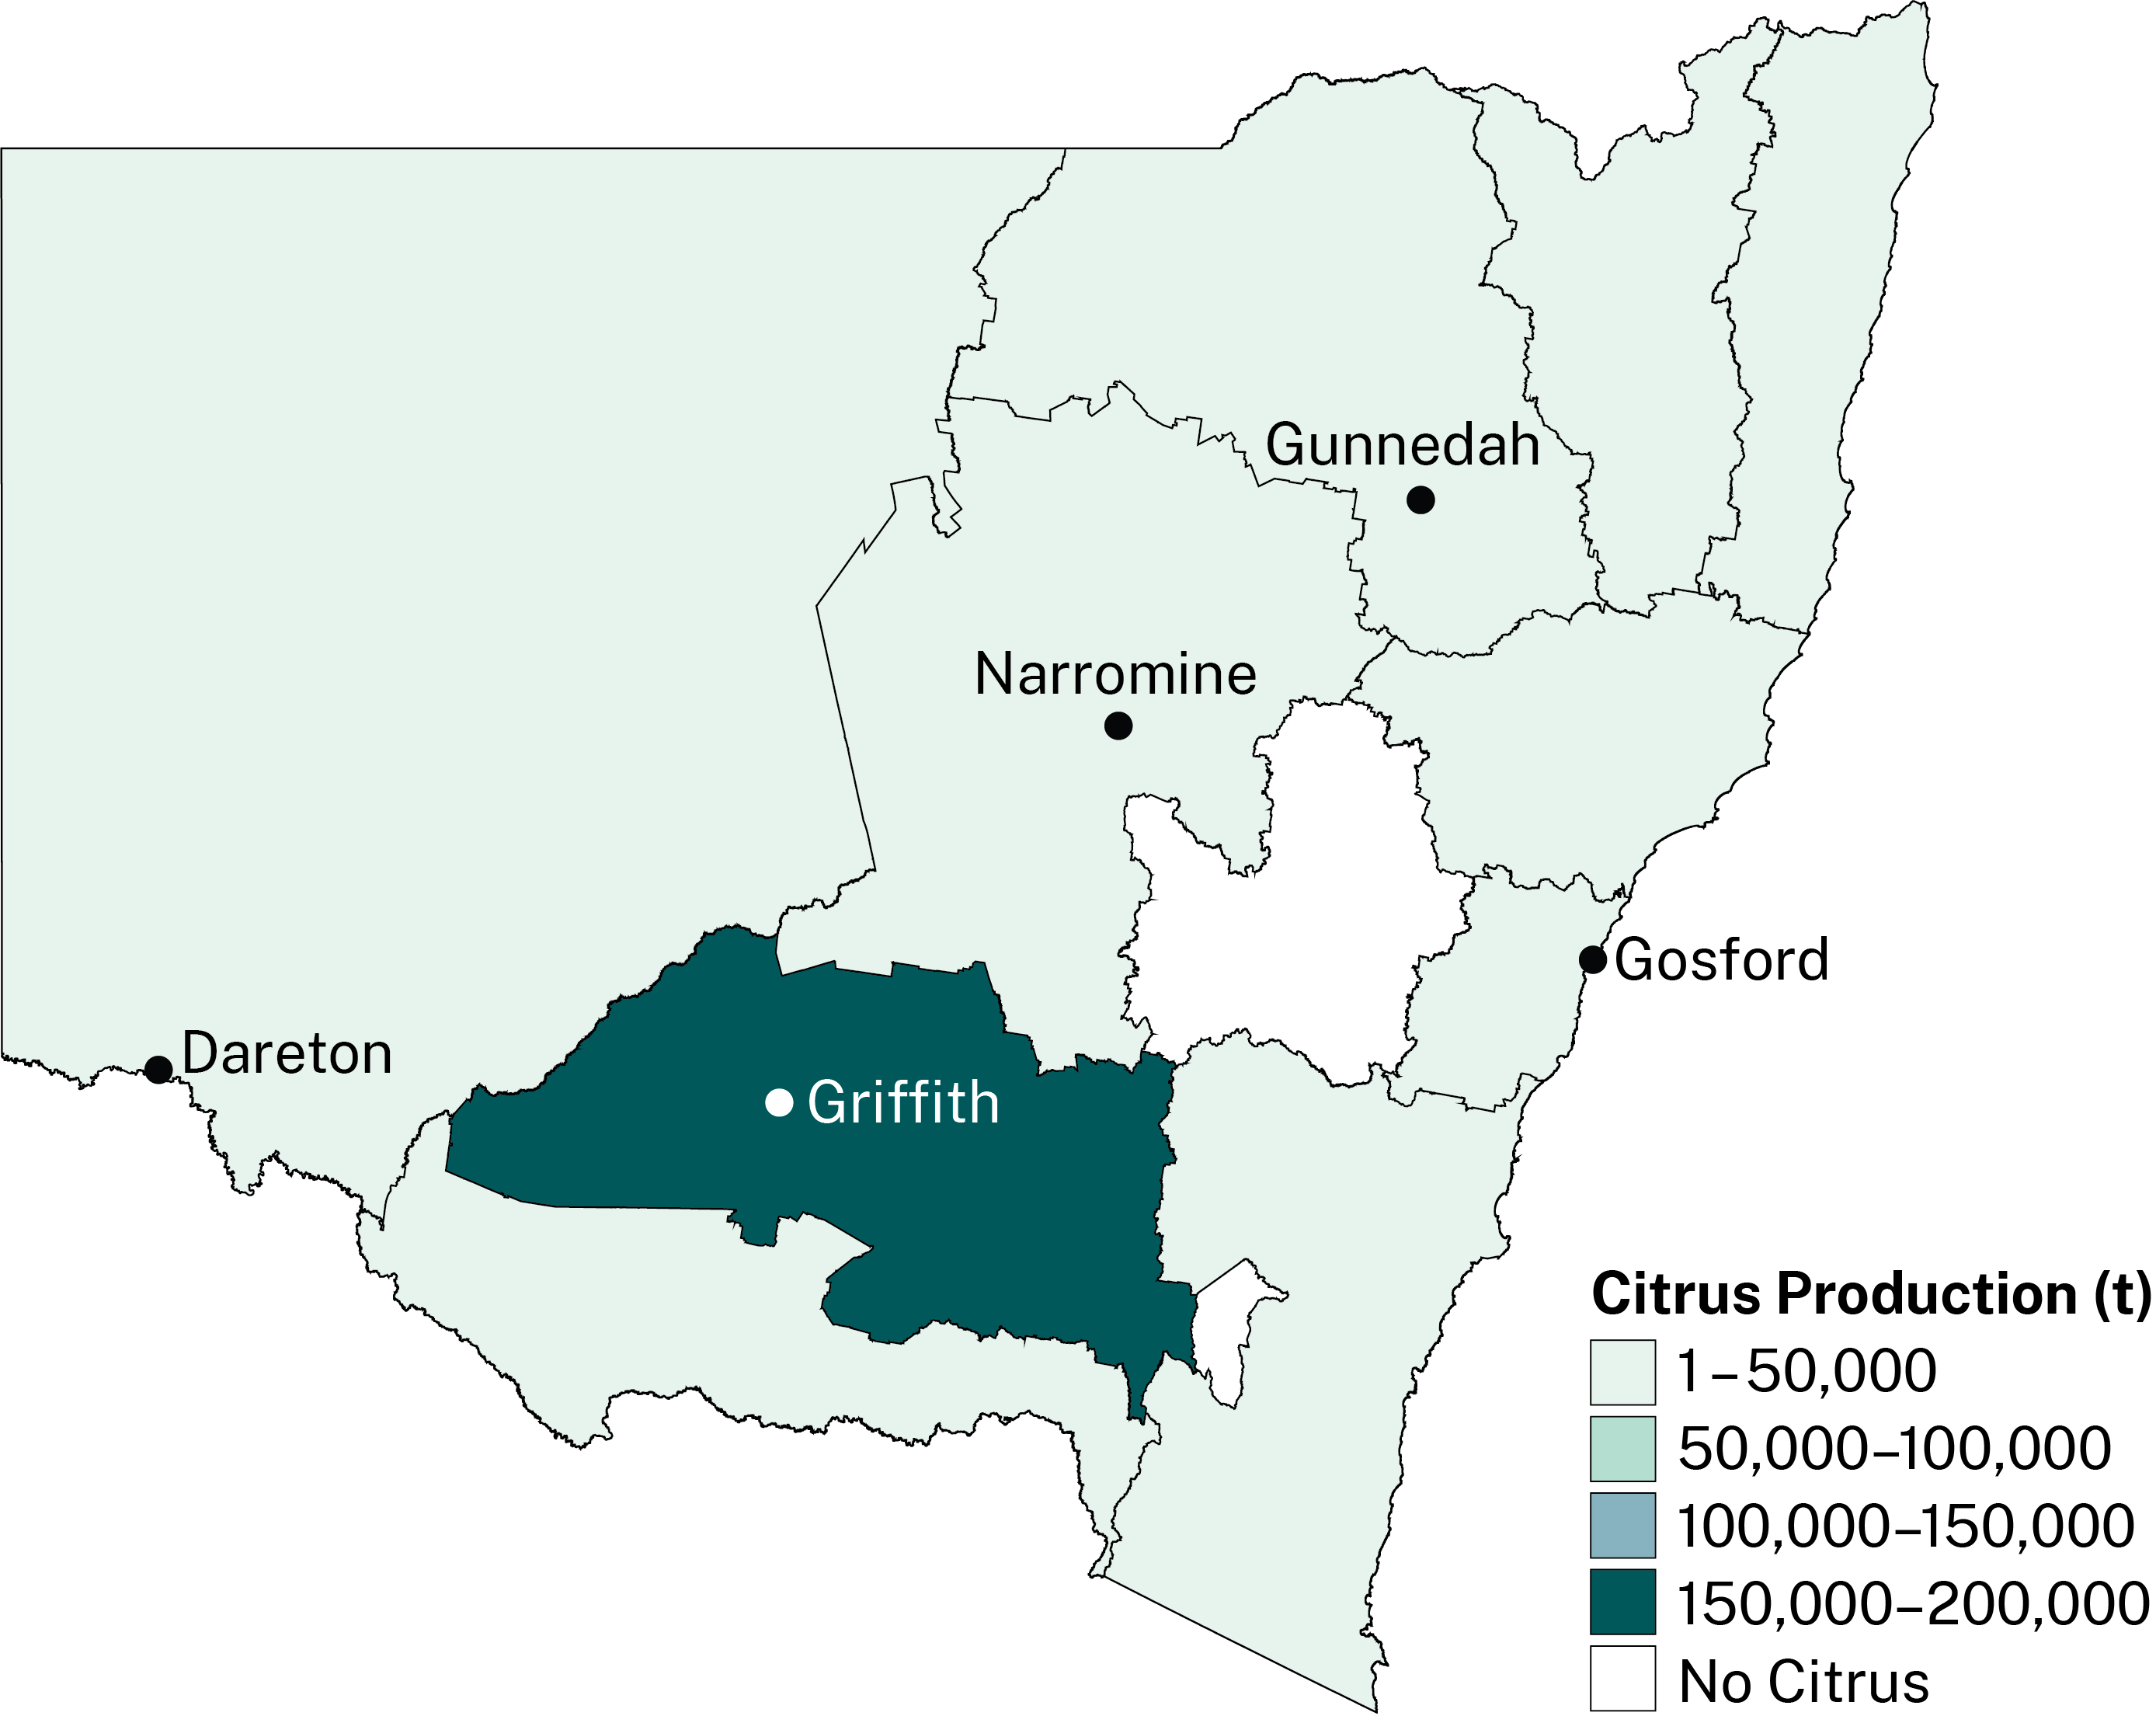 Citrus production in NSW is concentrated in the Riverina region, but also extends across most of the state.